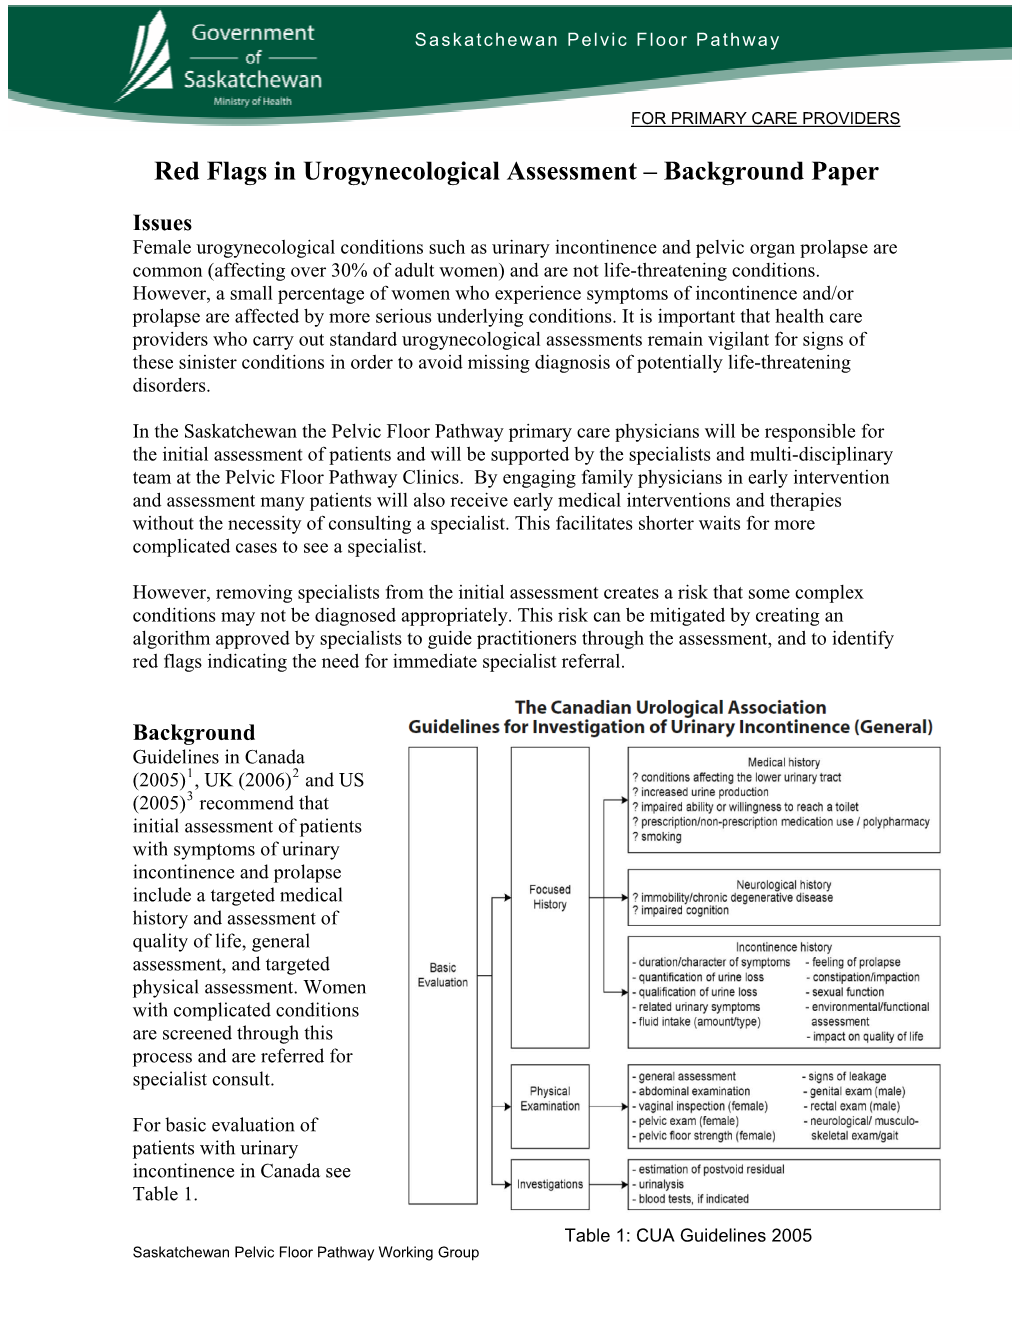 Red Flags in Urogynecological Assessment – Background Paper